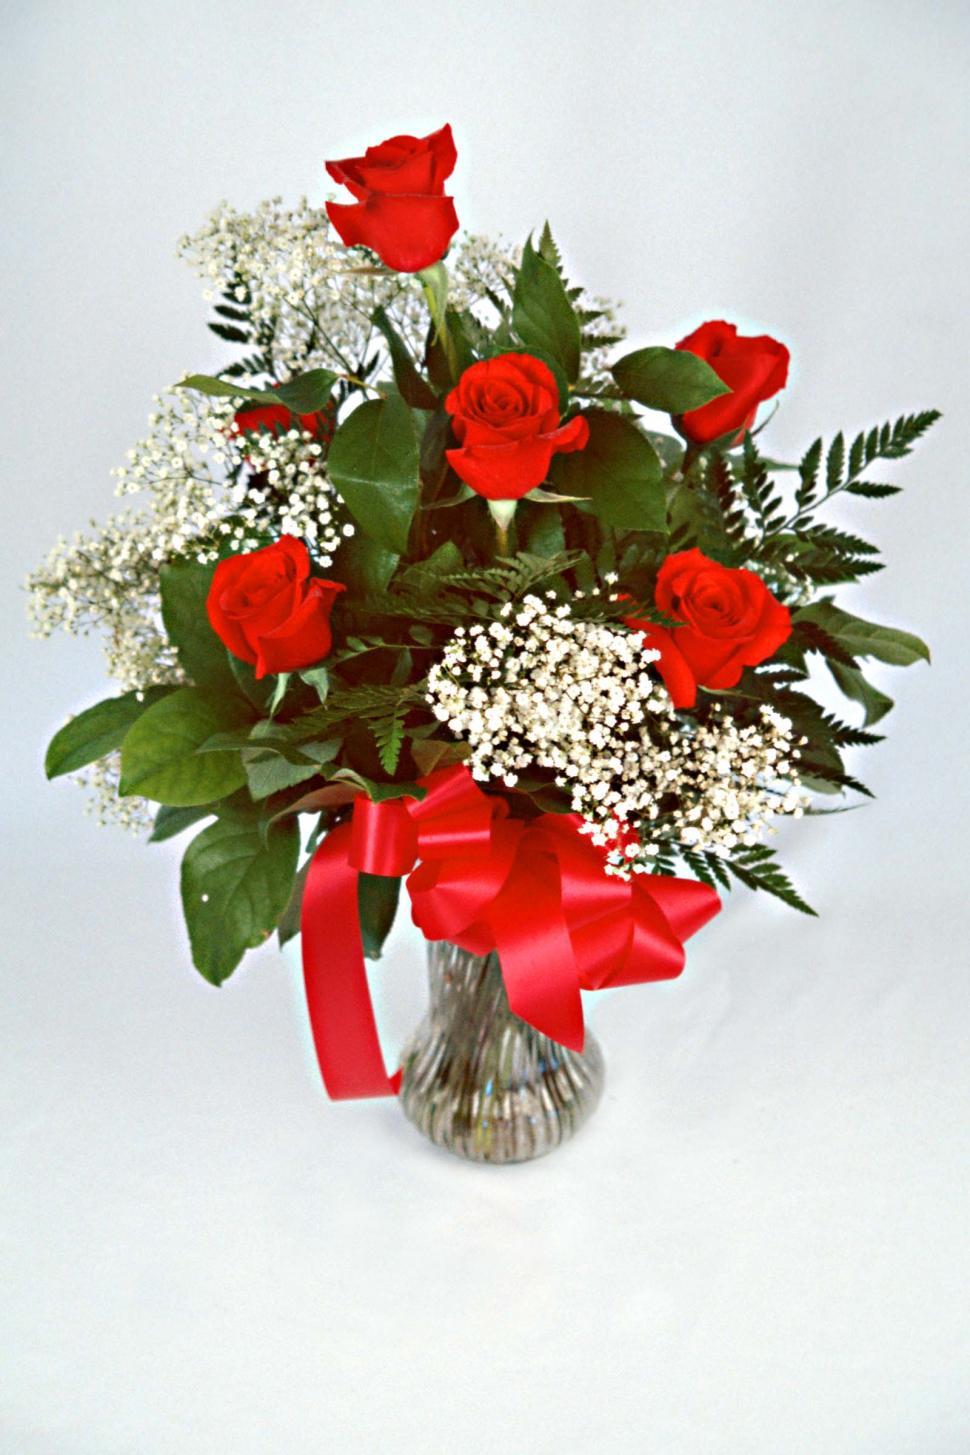 Free Image of Vase Filled With Red Roses and Babys Breath 